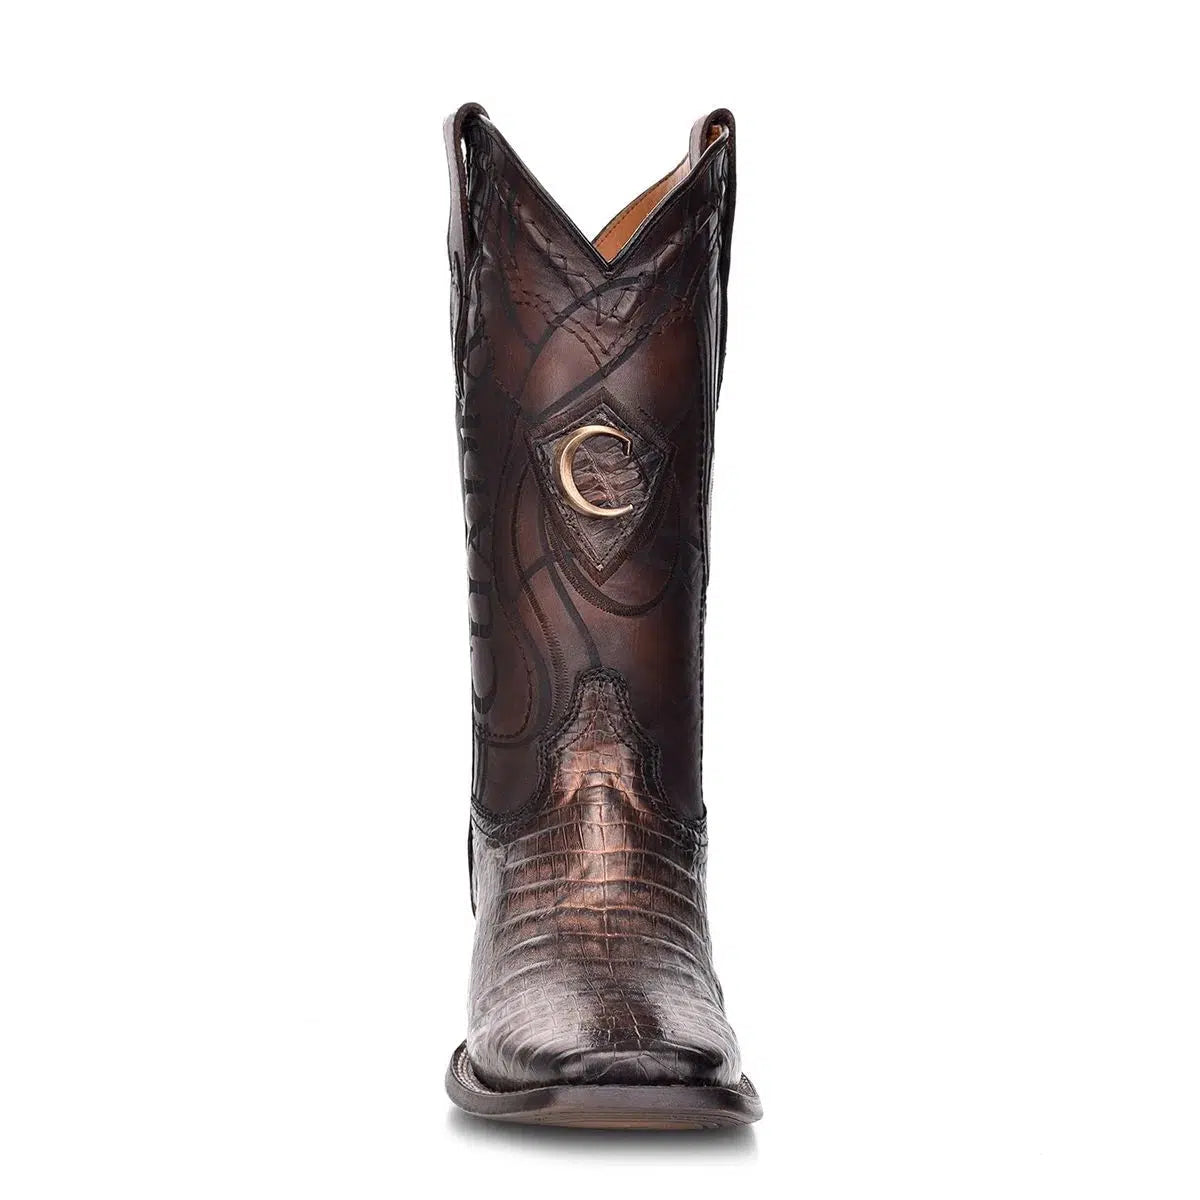 3Z1OFY - Cuadra brown western cowboy rodeo caiman leather boots for men